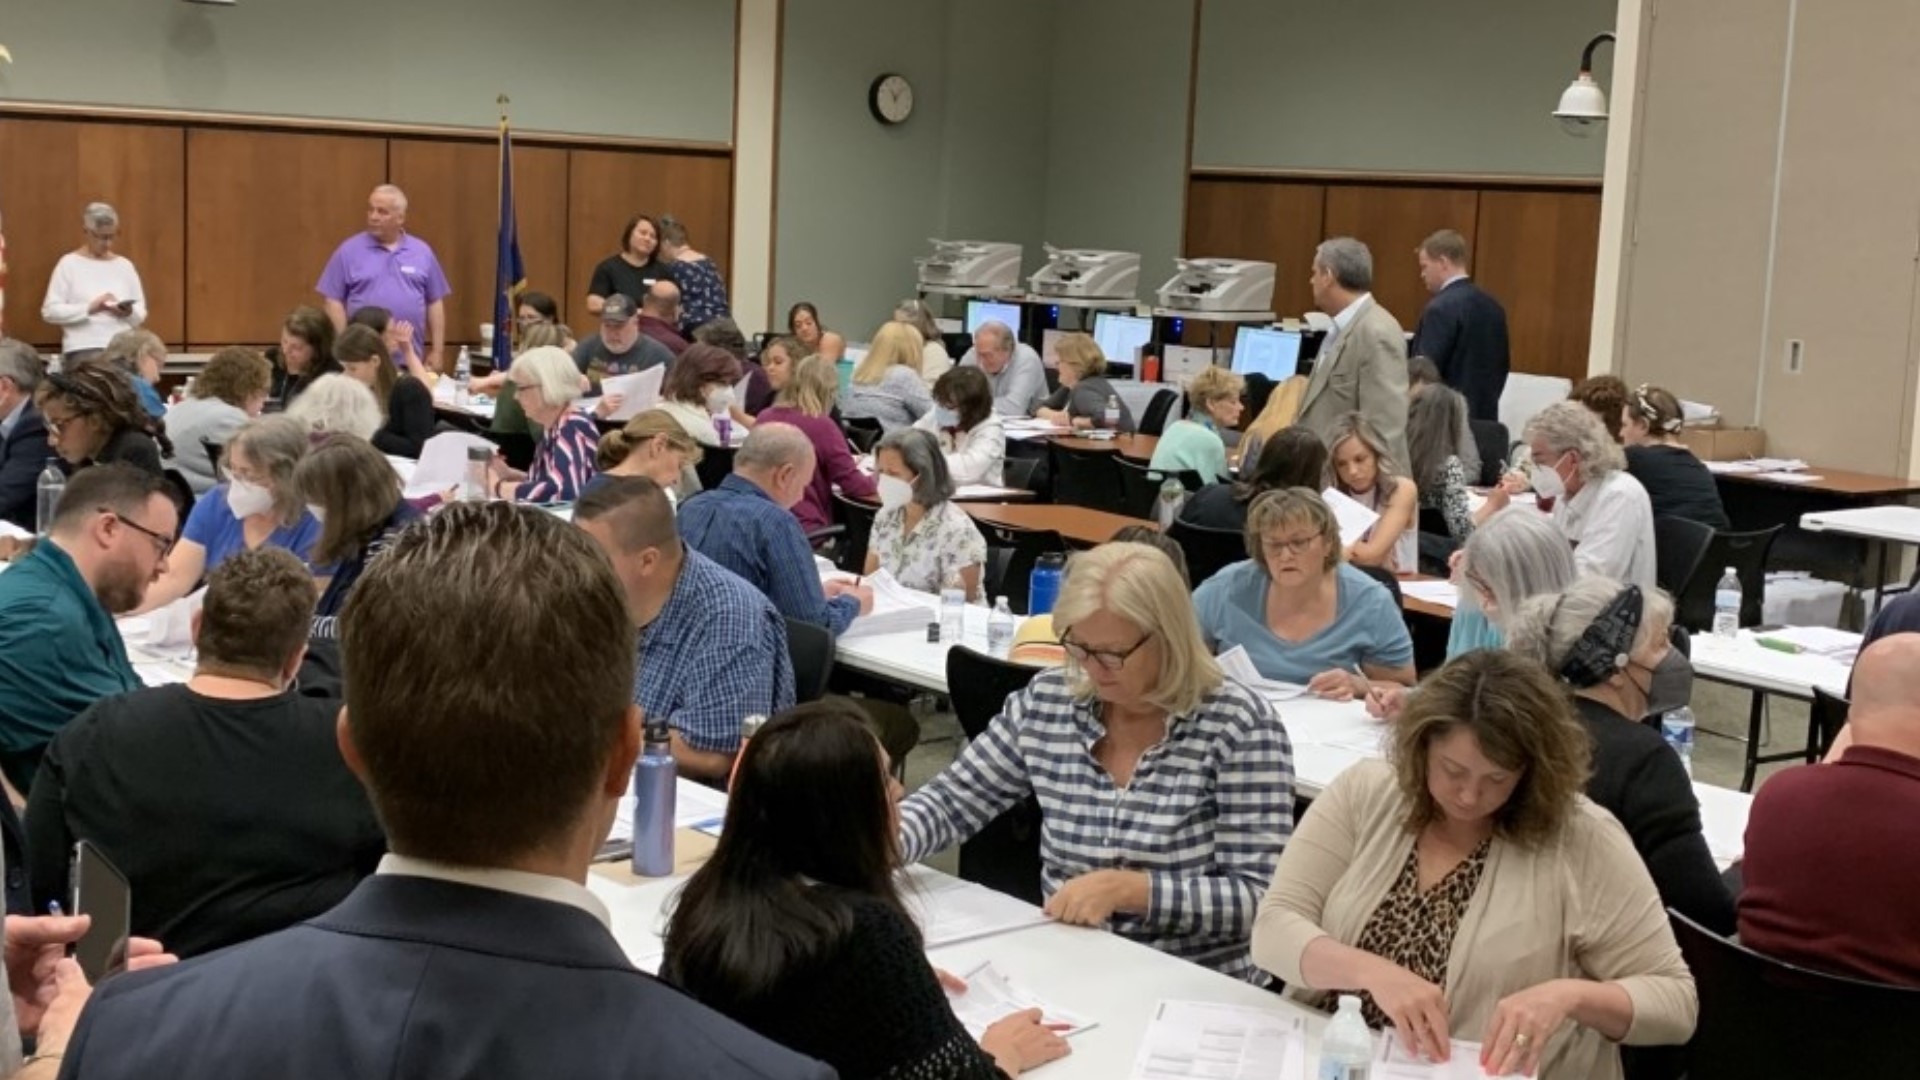 With the mail-in ballots scanned, the county is now preparing for a potential re-count to determine the Republican nominee for the US Senate race.